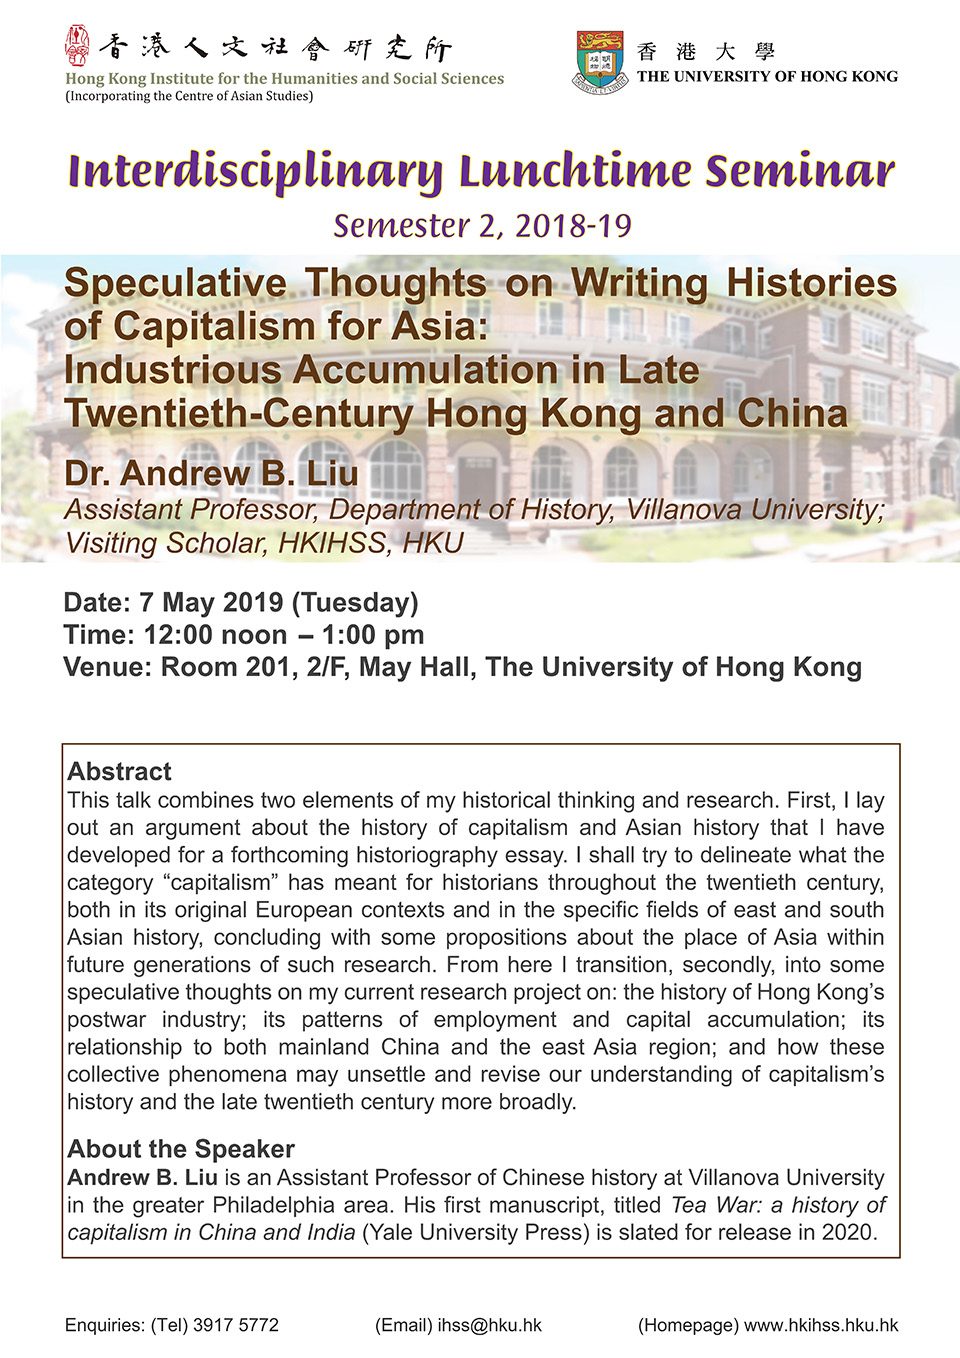 Interdisciplinary Lunchtime Seminar on “Speculative Thoughts on Writing Histories of Capitalism for Asia: Industrious Accumulation in Late Twentieth-Century Hong Kong and China” by Dr. Andrew B. Liu (May 7, 2019)